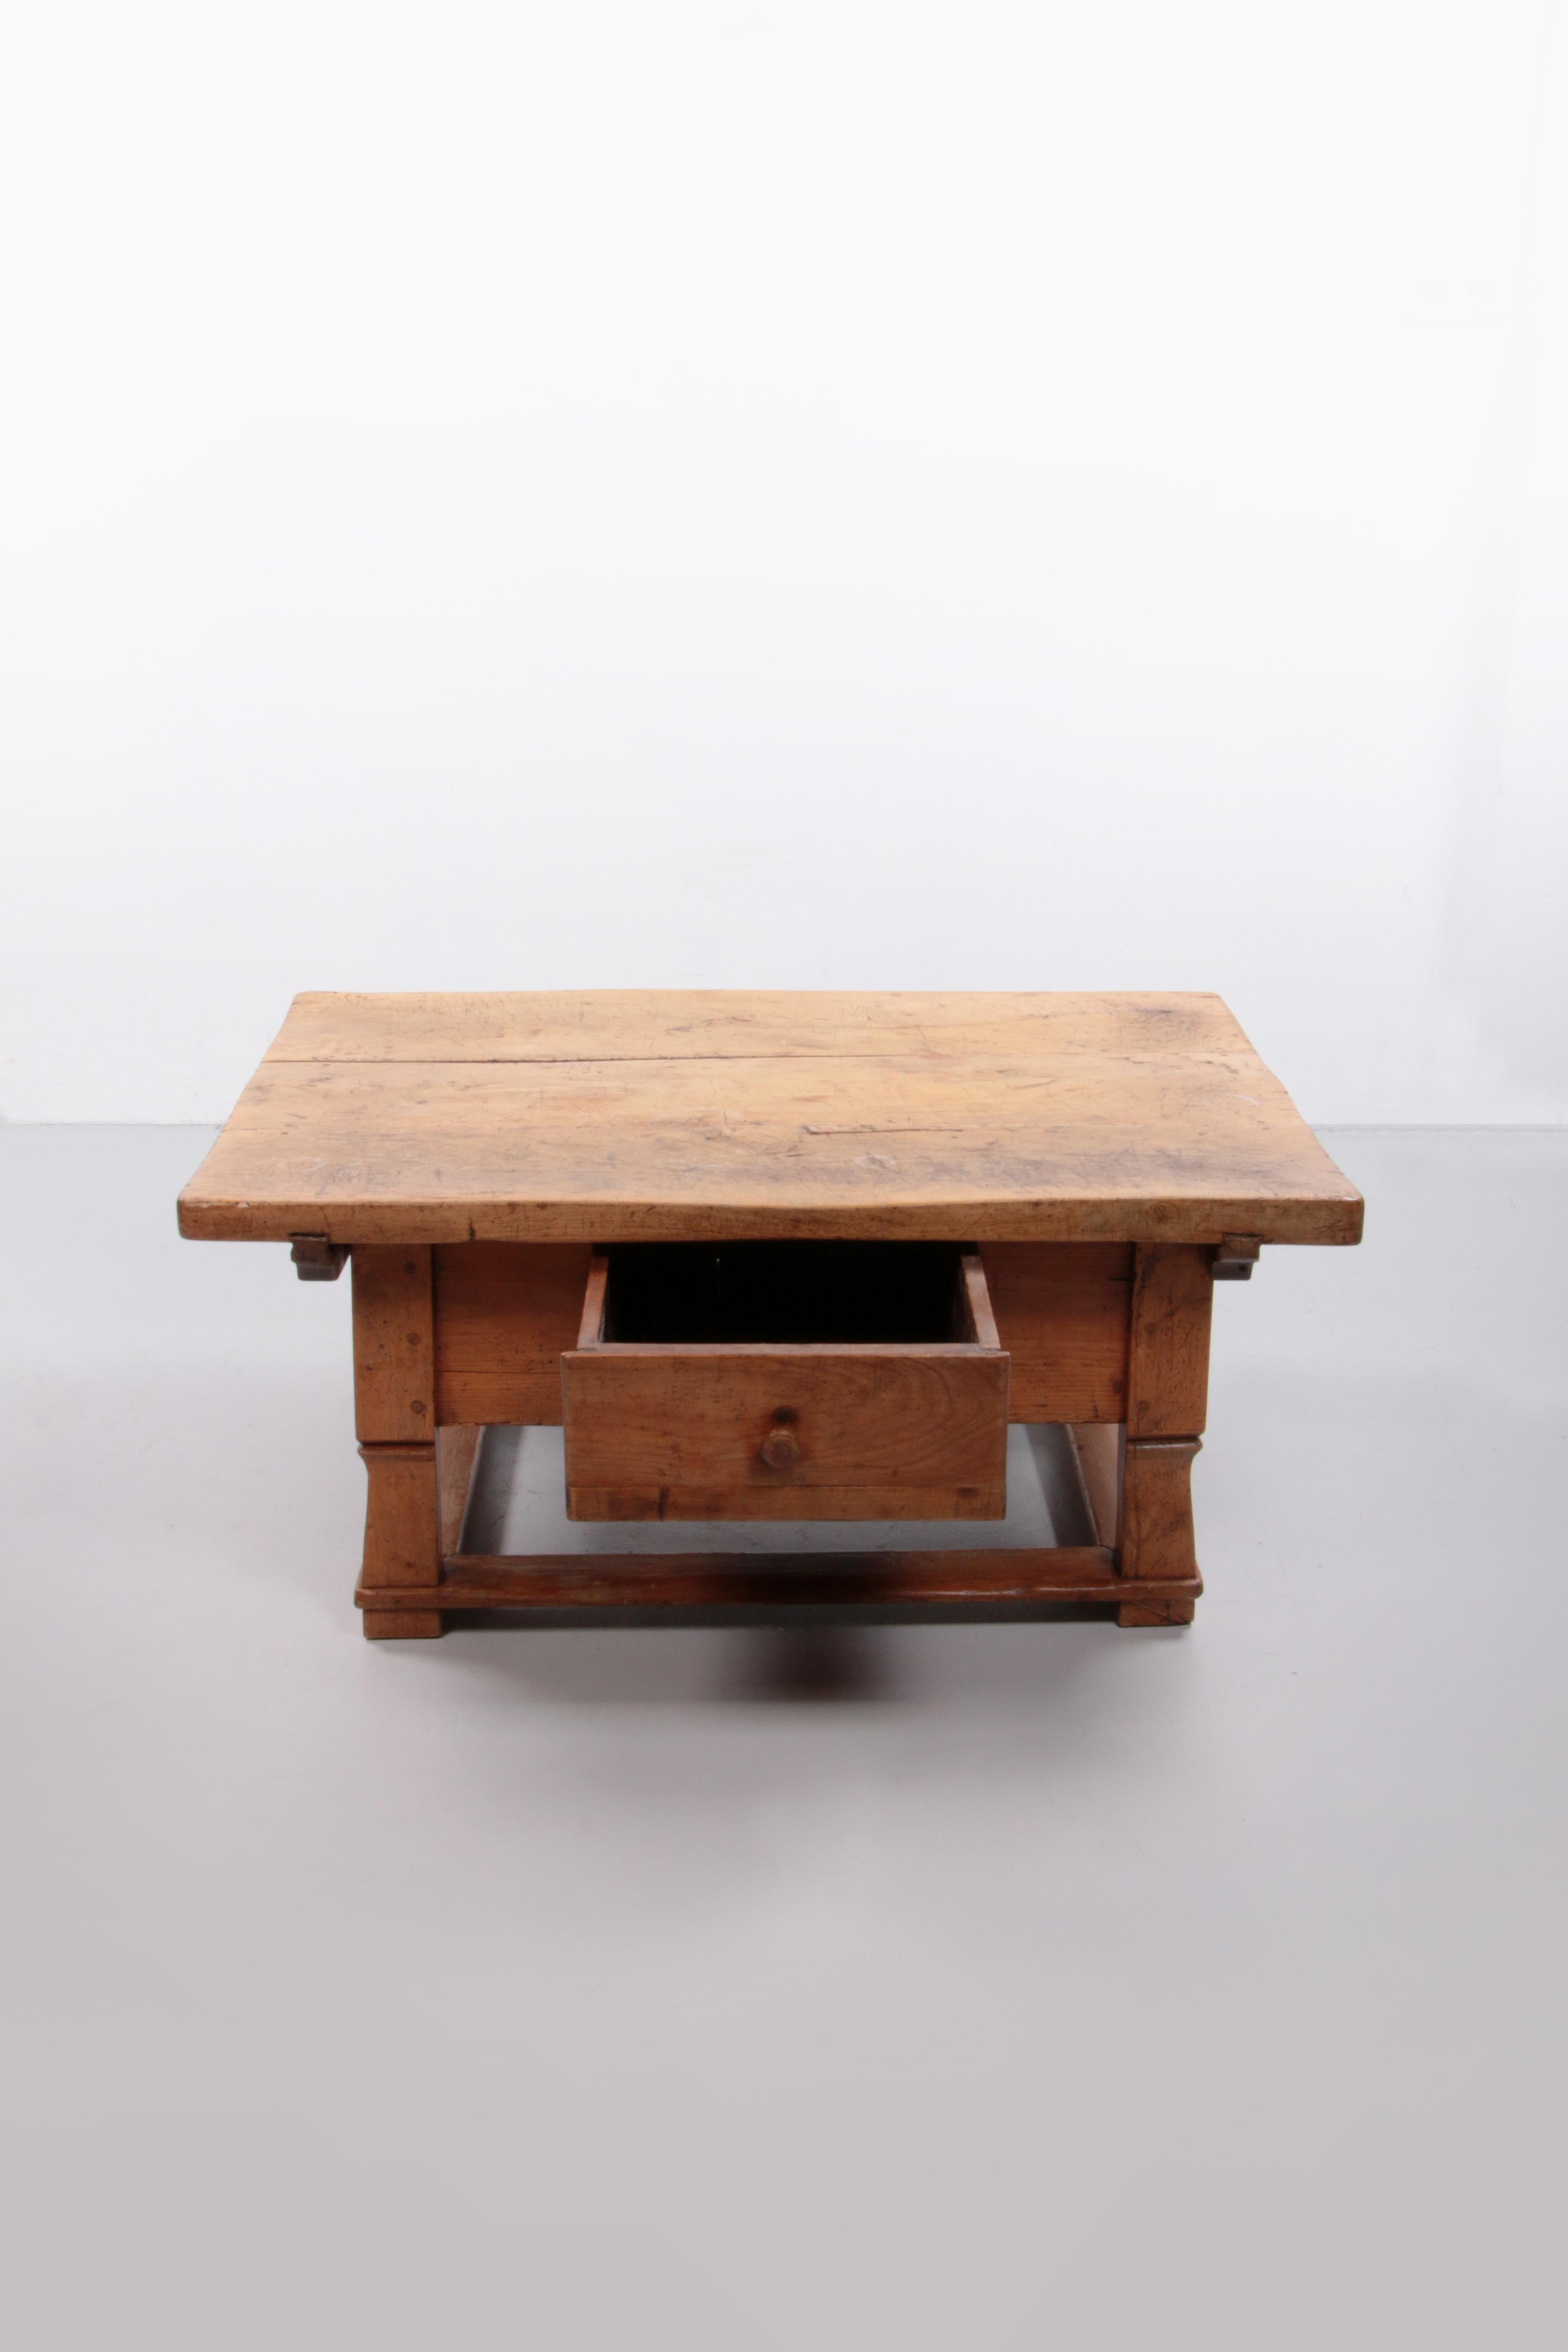 Brutalist Austrian Coffee Table18- 19th Century Walnut Payment Table with Drawer, Austria For Sale